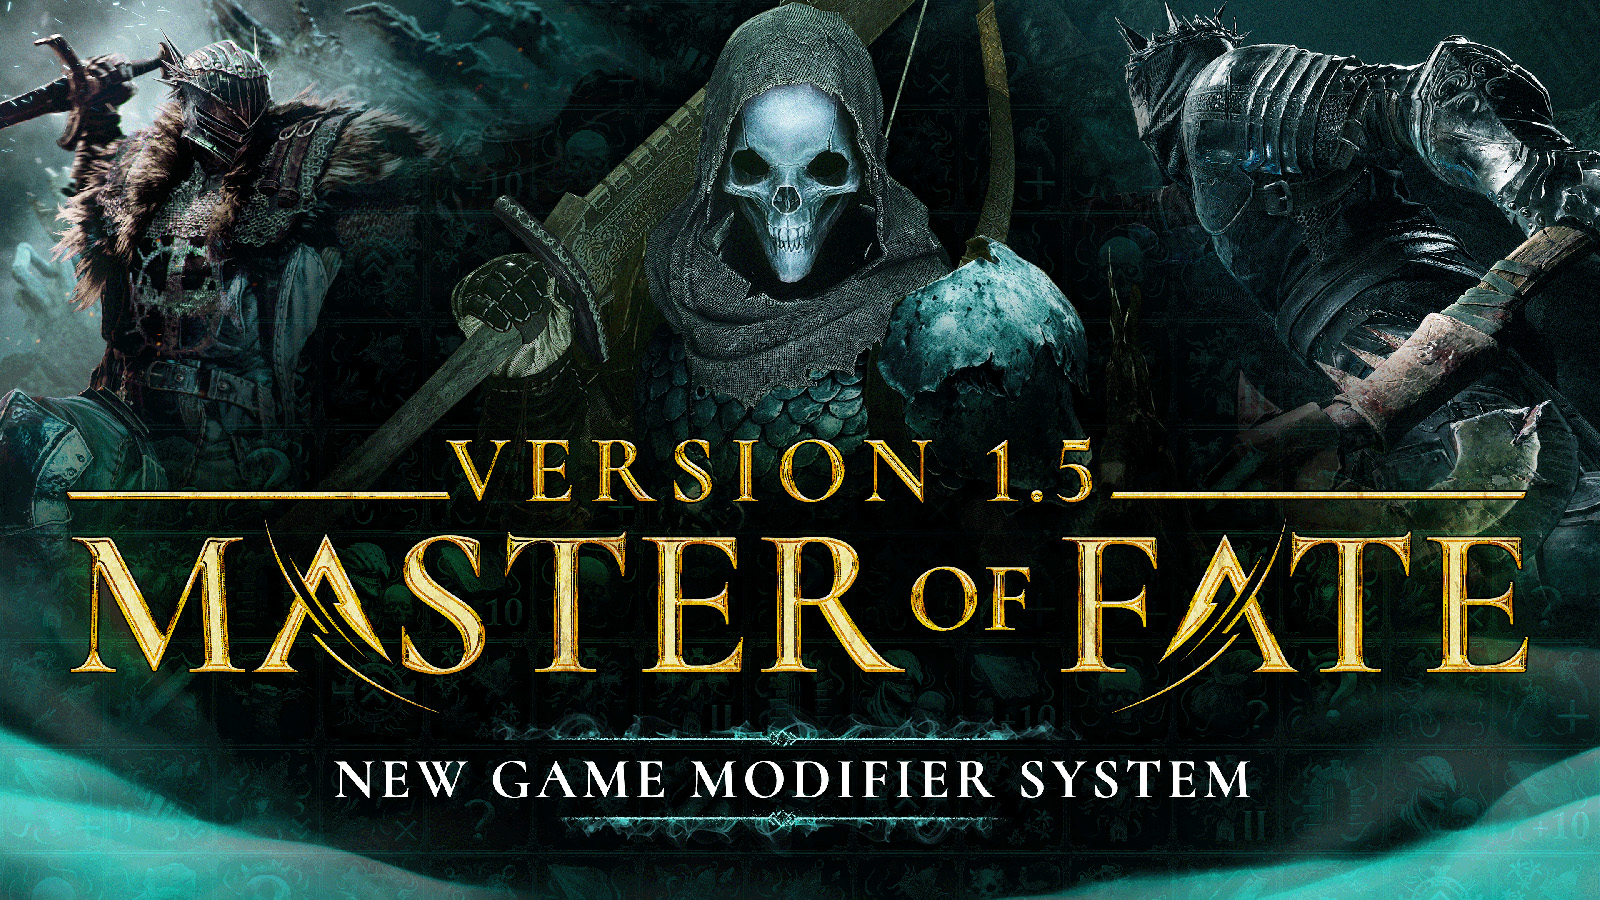 The artwork for Lords Of The Fallen's Master Of Fate update that showcases a character in a hood with a skull mask.